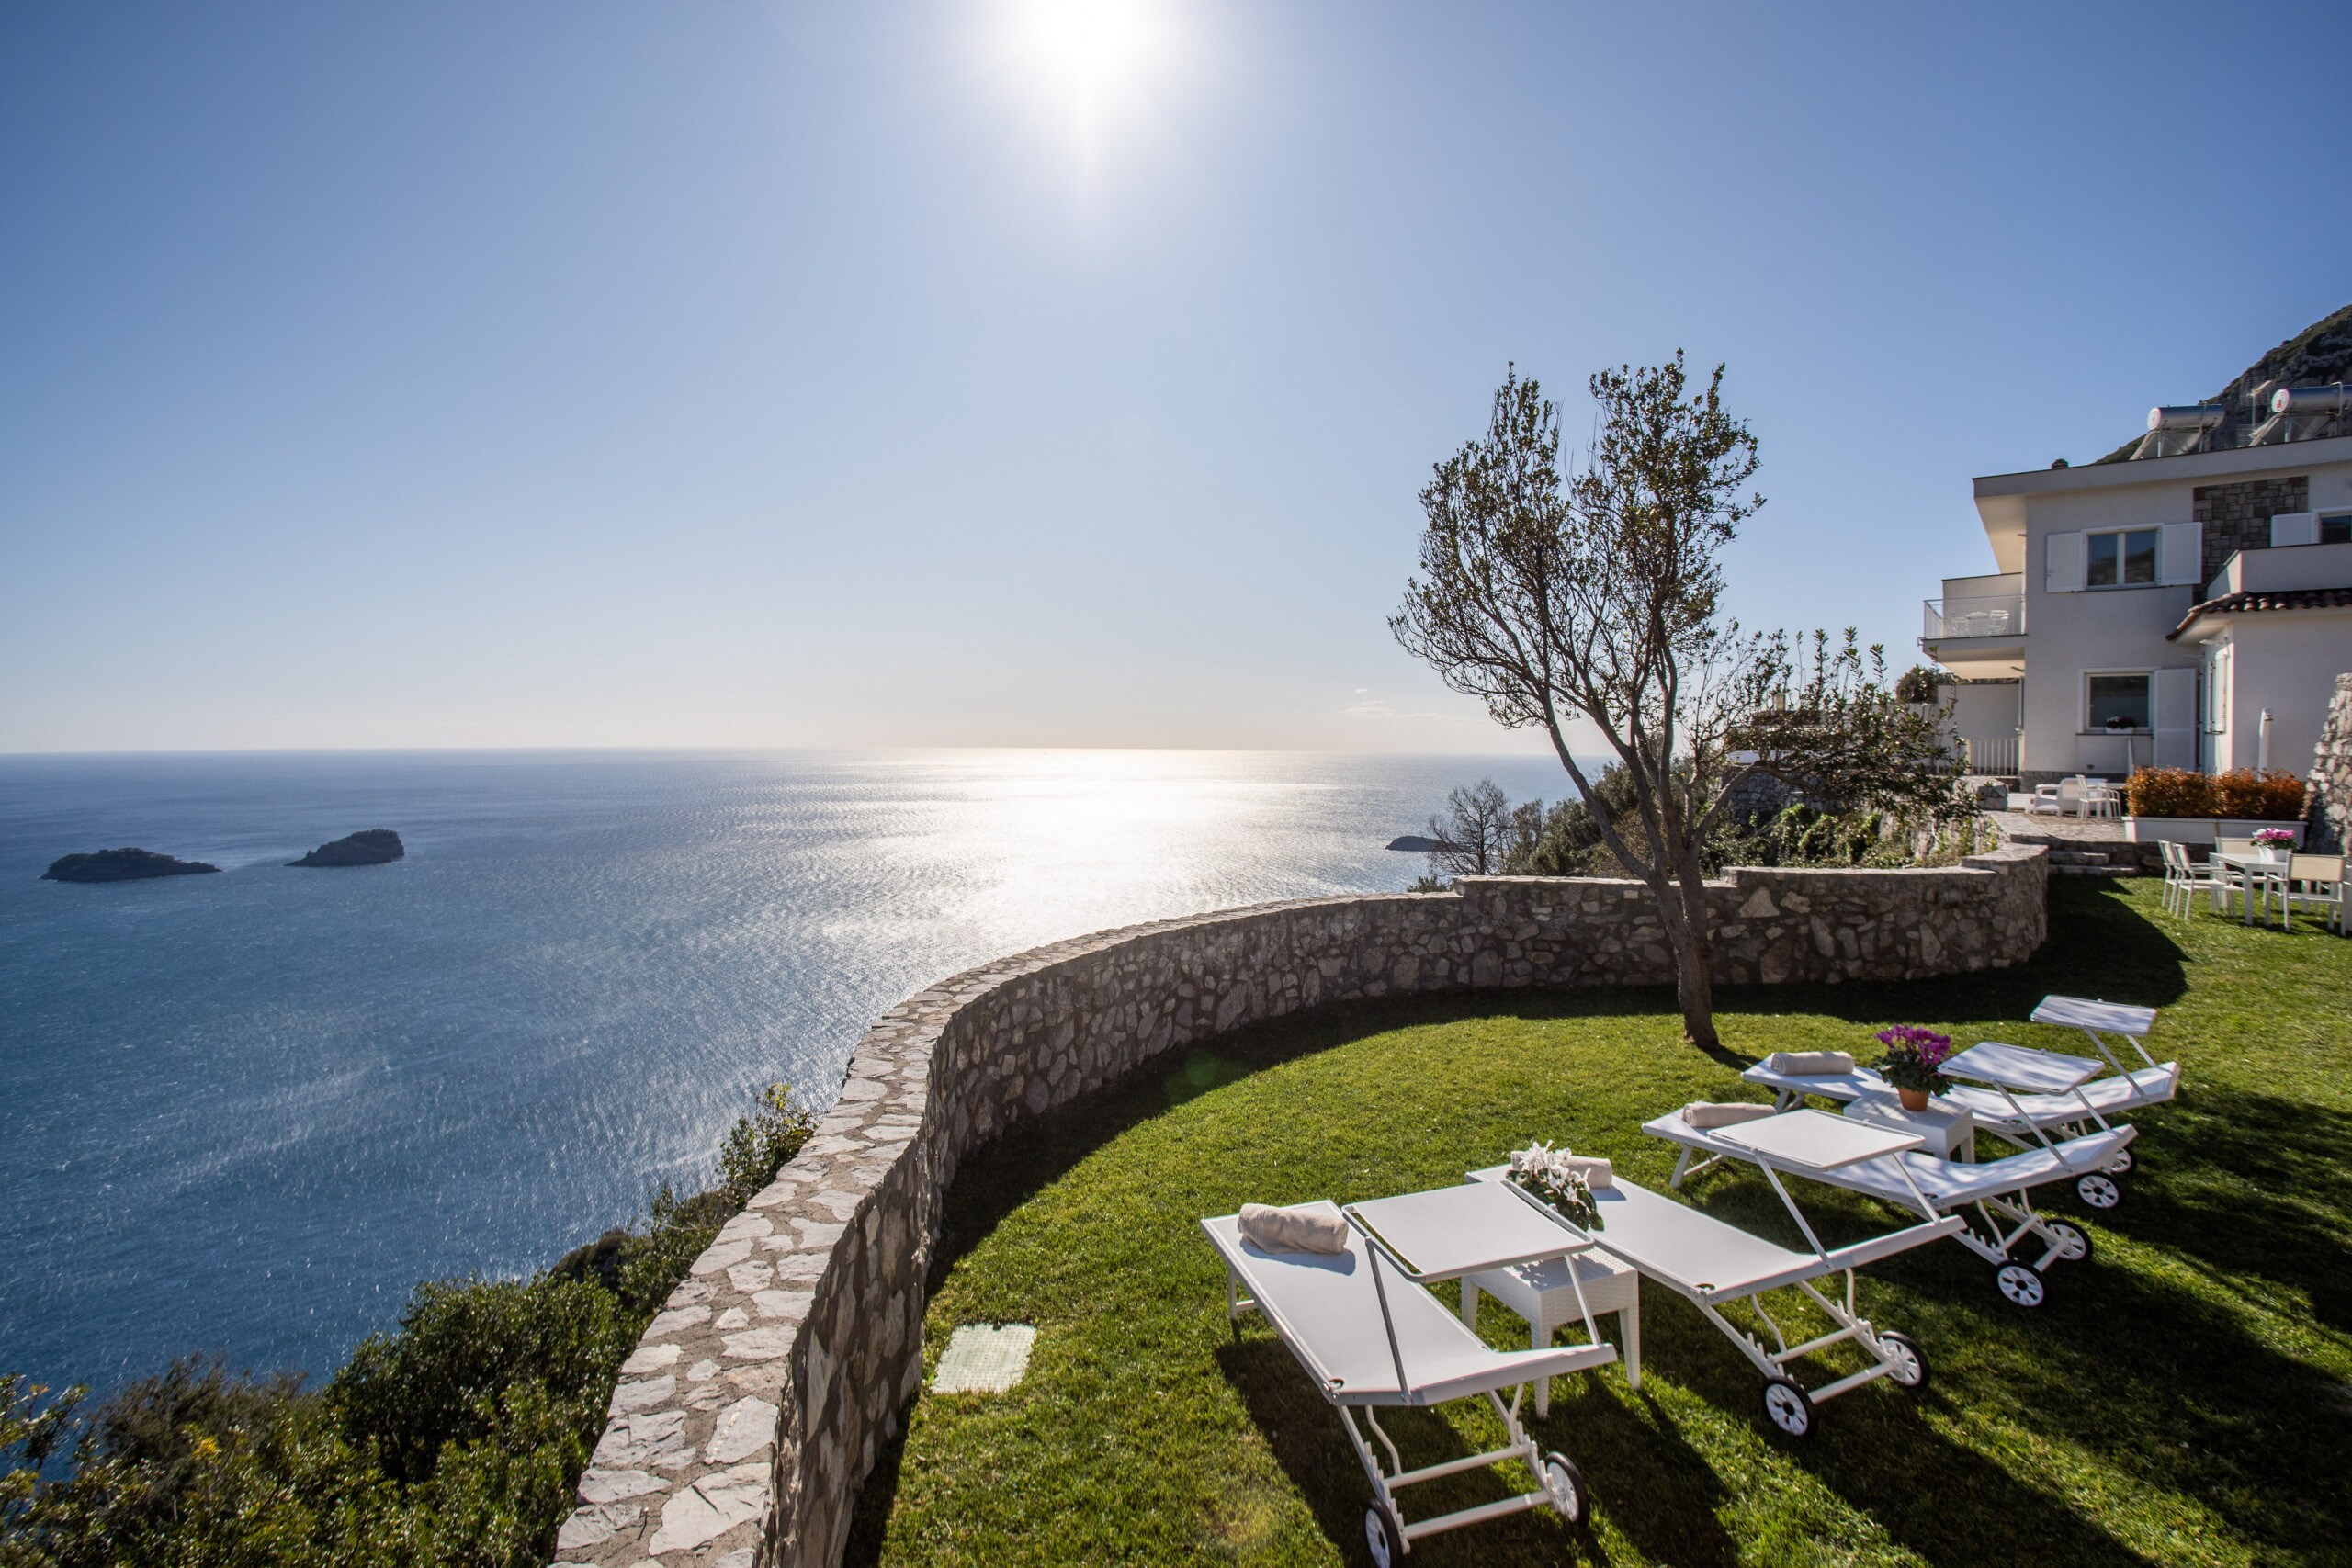 Property Image 1 - Belvedere delle Sirene. Seaside Villa with Majestic Views of the Mediterranean